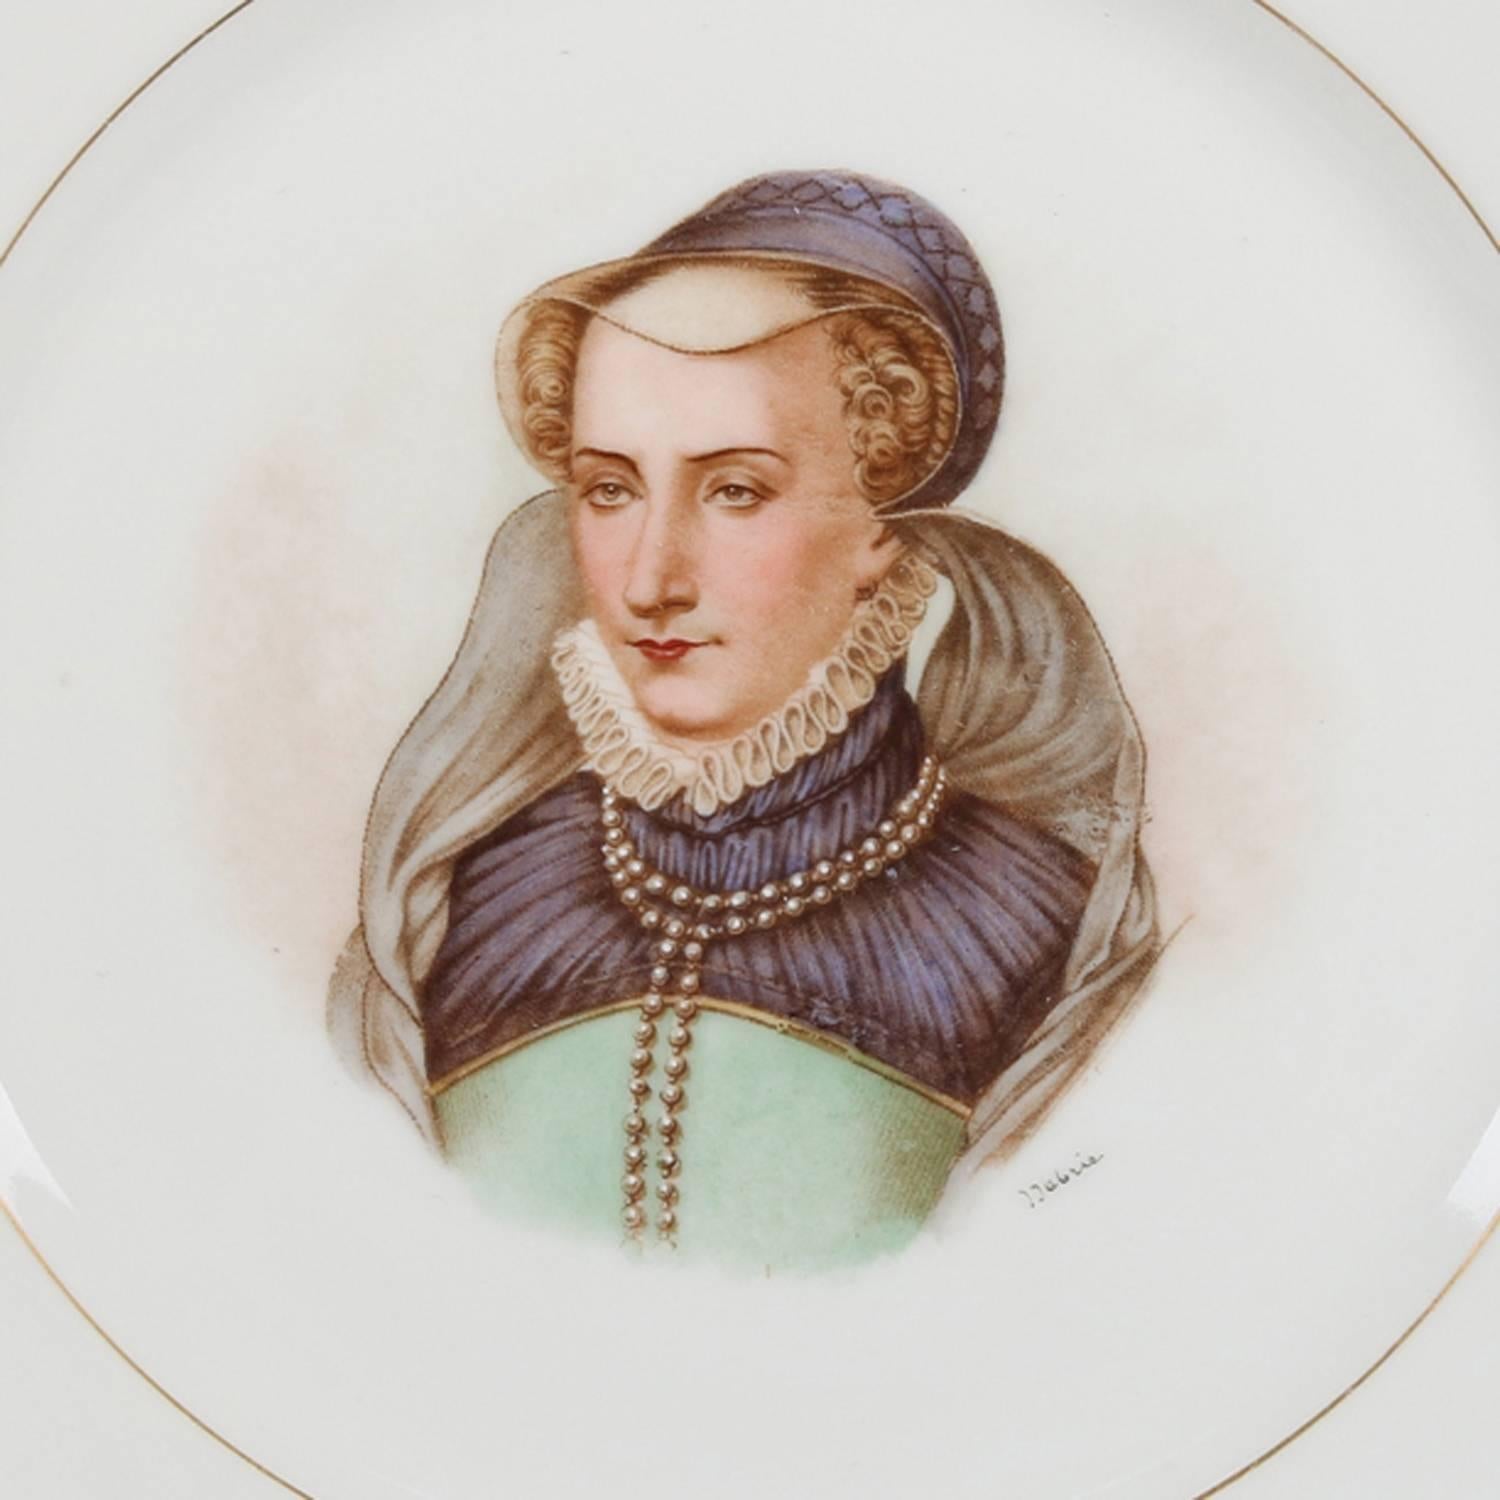 Antique French porcelain portrait plate by Sevres for Chateau de St cloud features well with central artist signed portrait of Jeanne D'Albret by Debrie and framed with gilt repeating and stylized fleur de lis pattern, rim with gilt scalloped edges